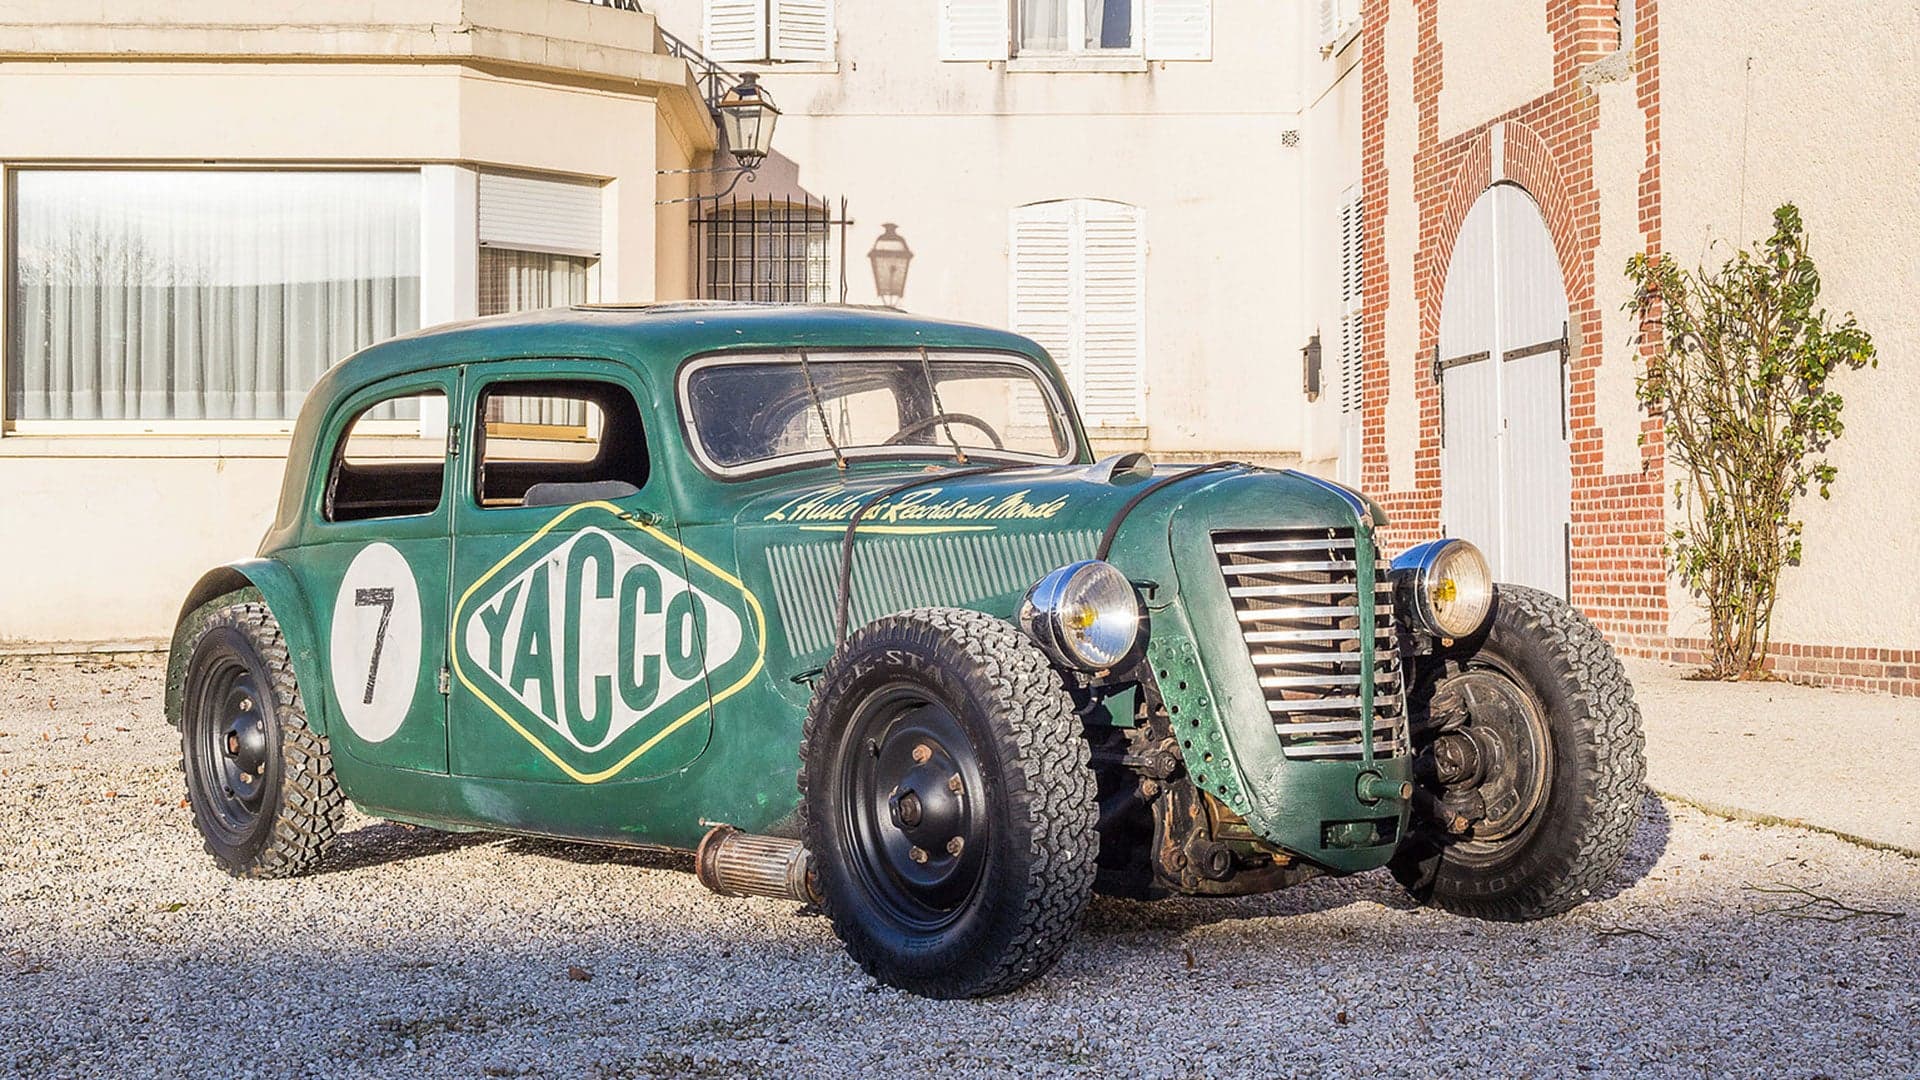 It Took 27 Years to Build This French Hot Rod